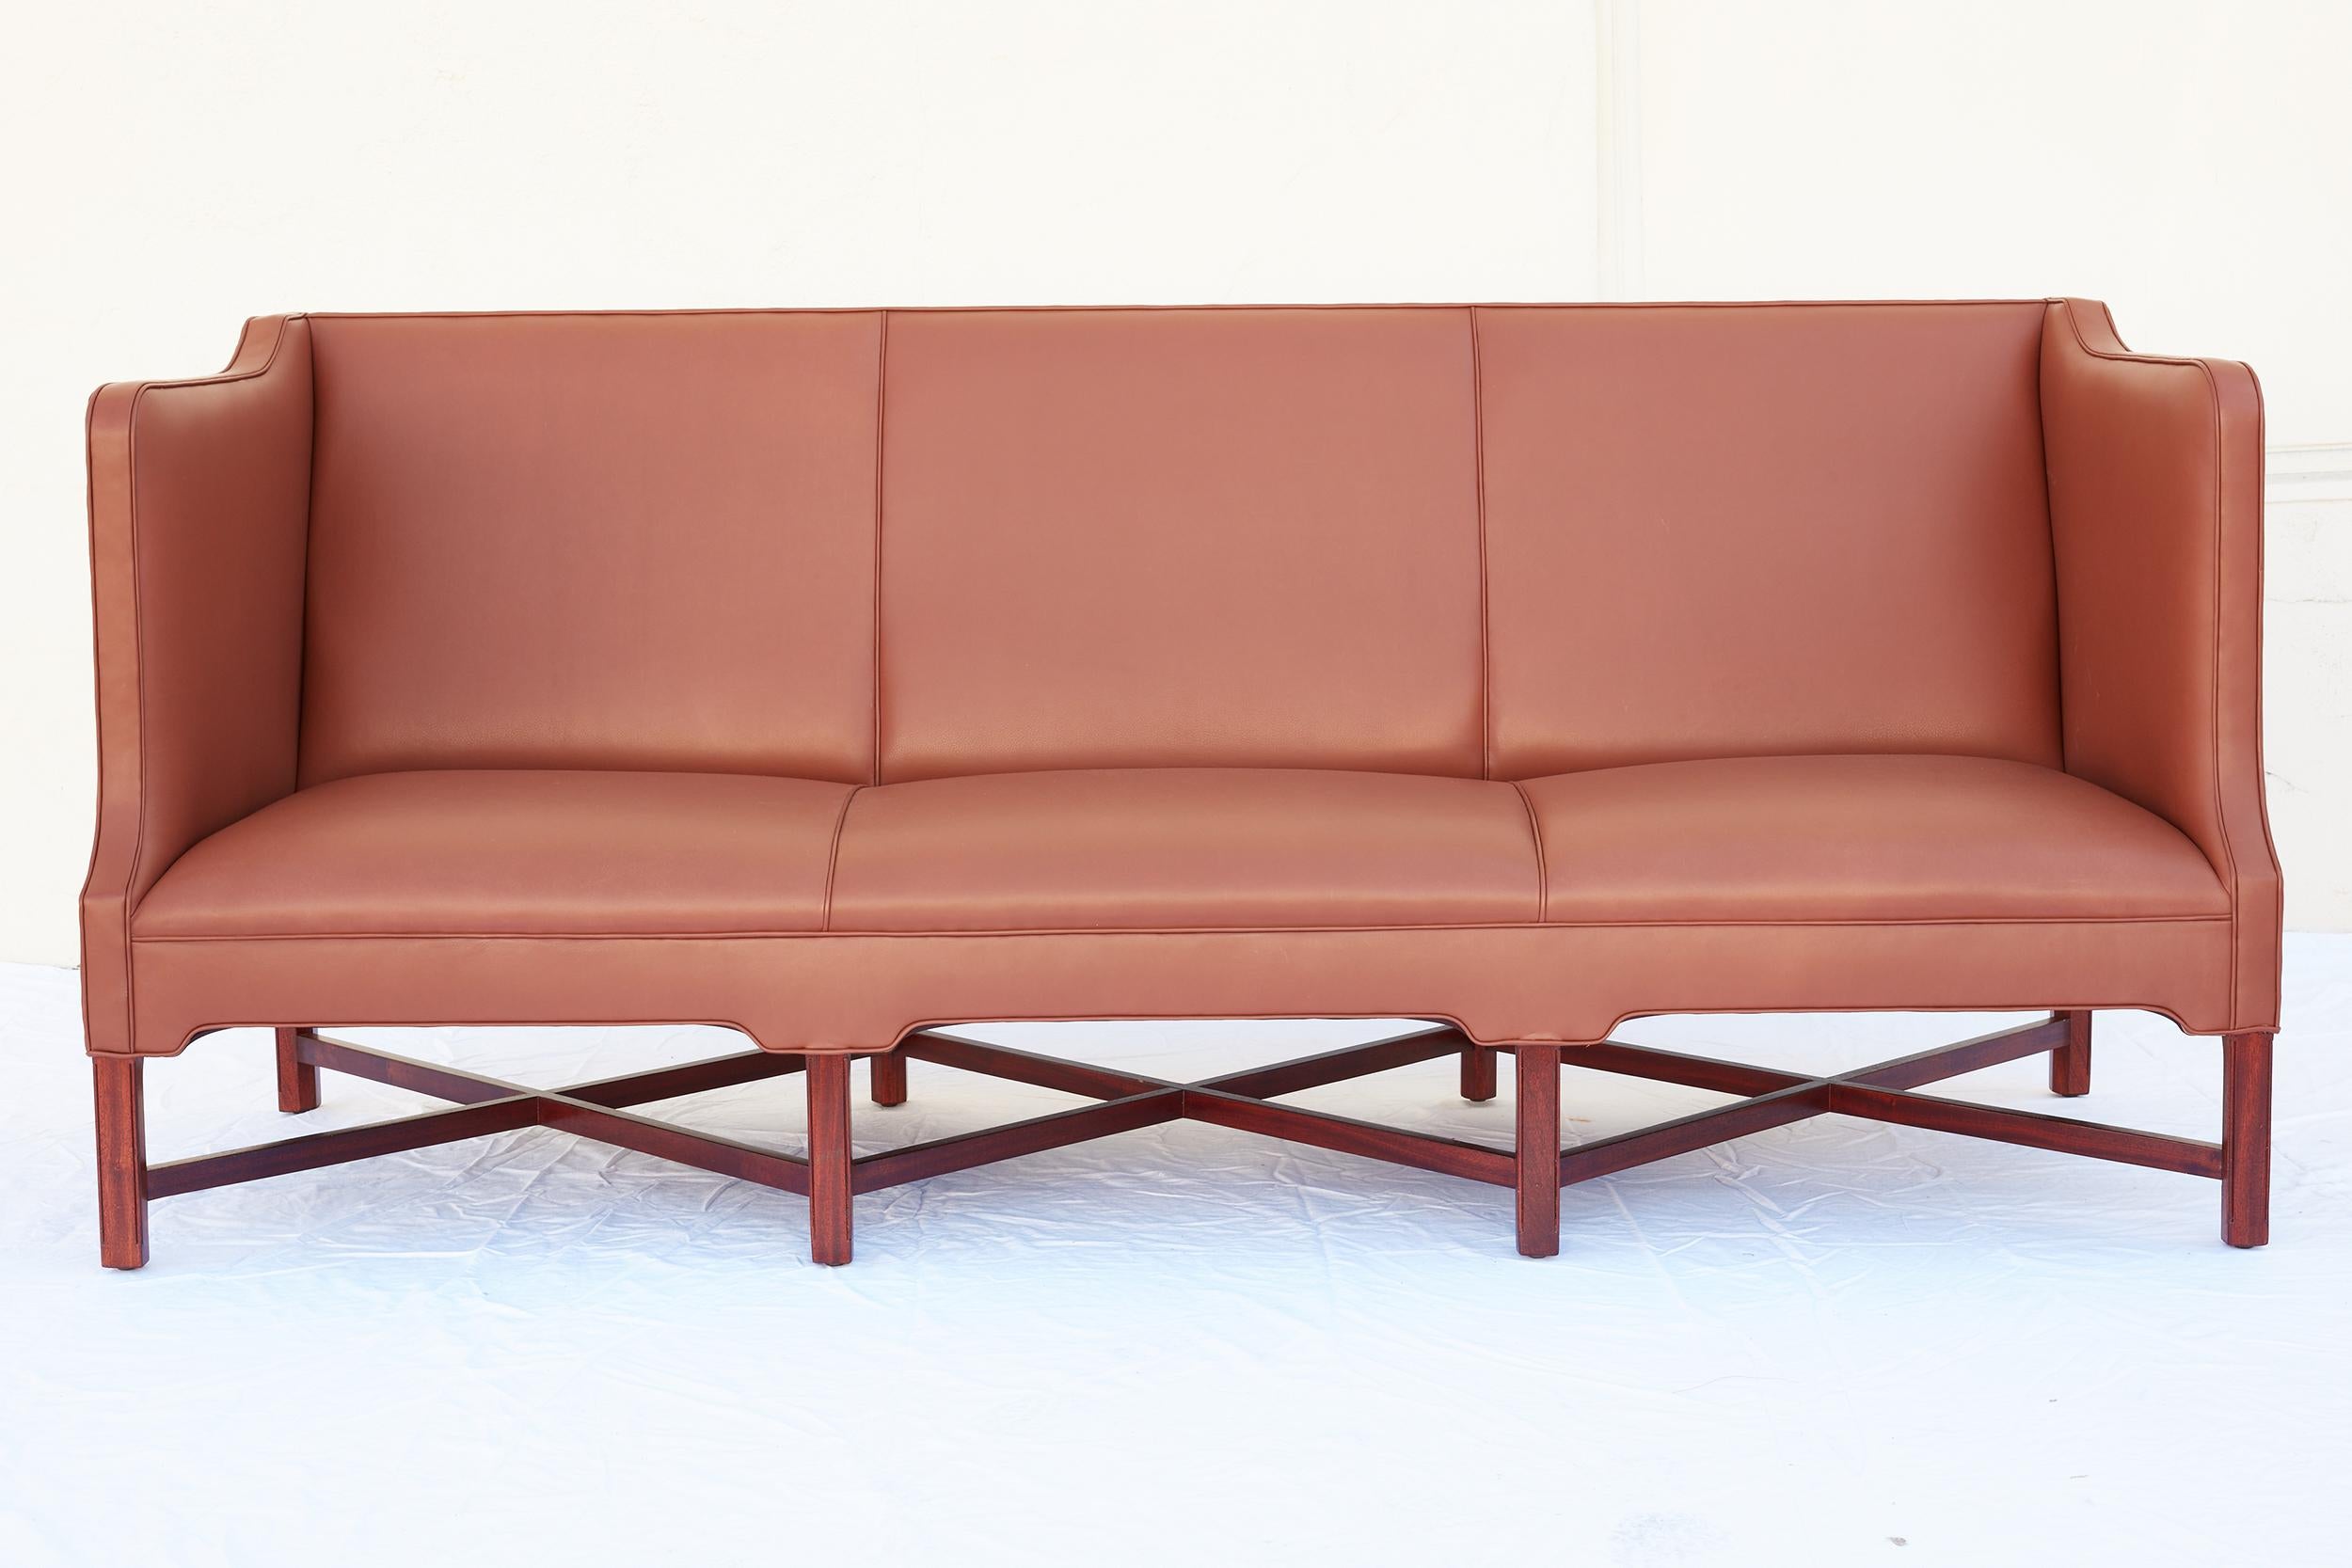 Kaare Klint X-base sofa, Model #4118. Designed in 1930 and produced by Rud Rasmussen.